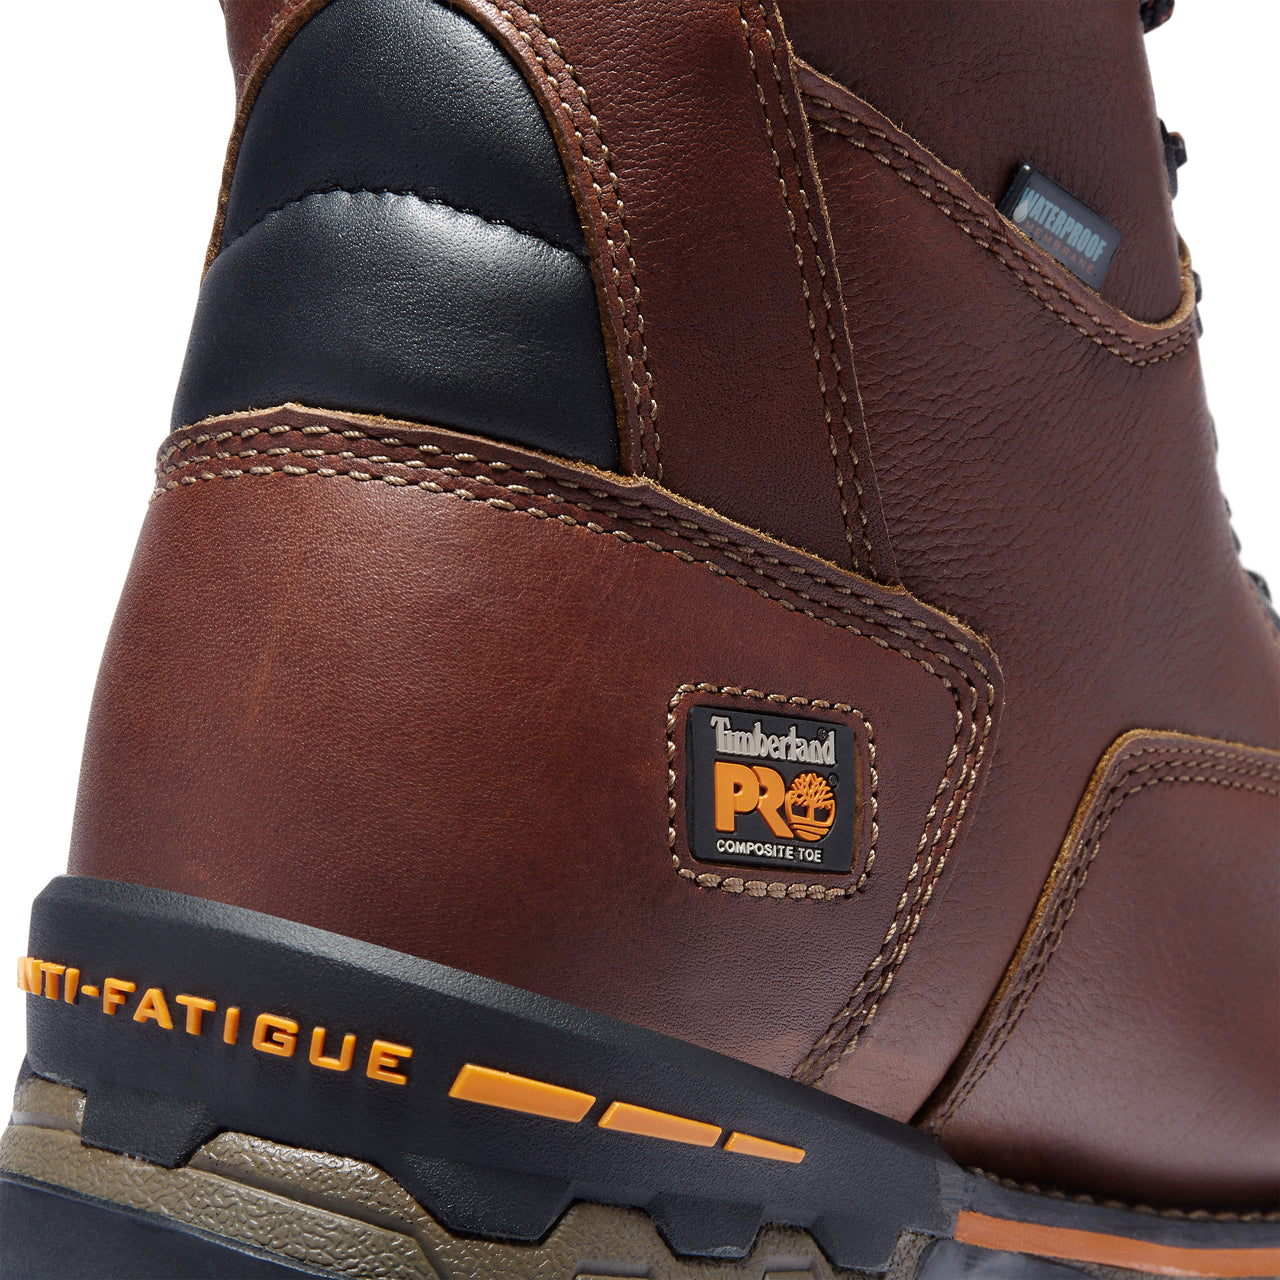 Timberland Pro 8" Brown Composite Toe Boondock TB089646